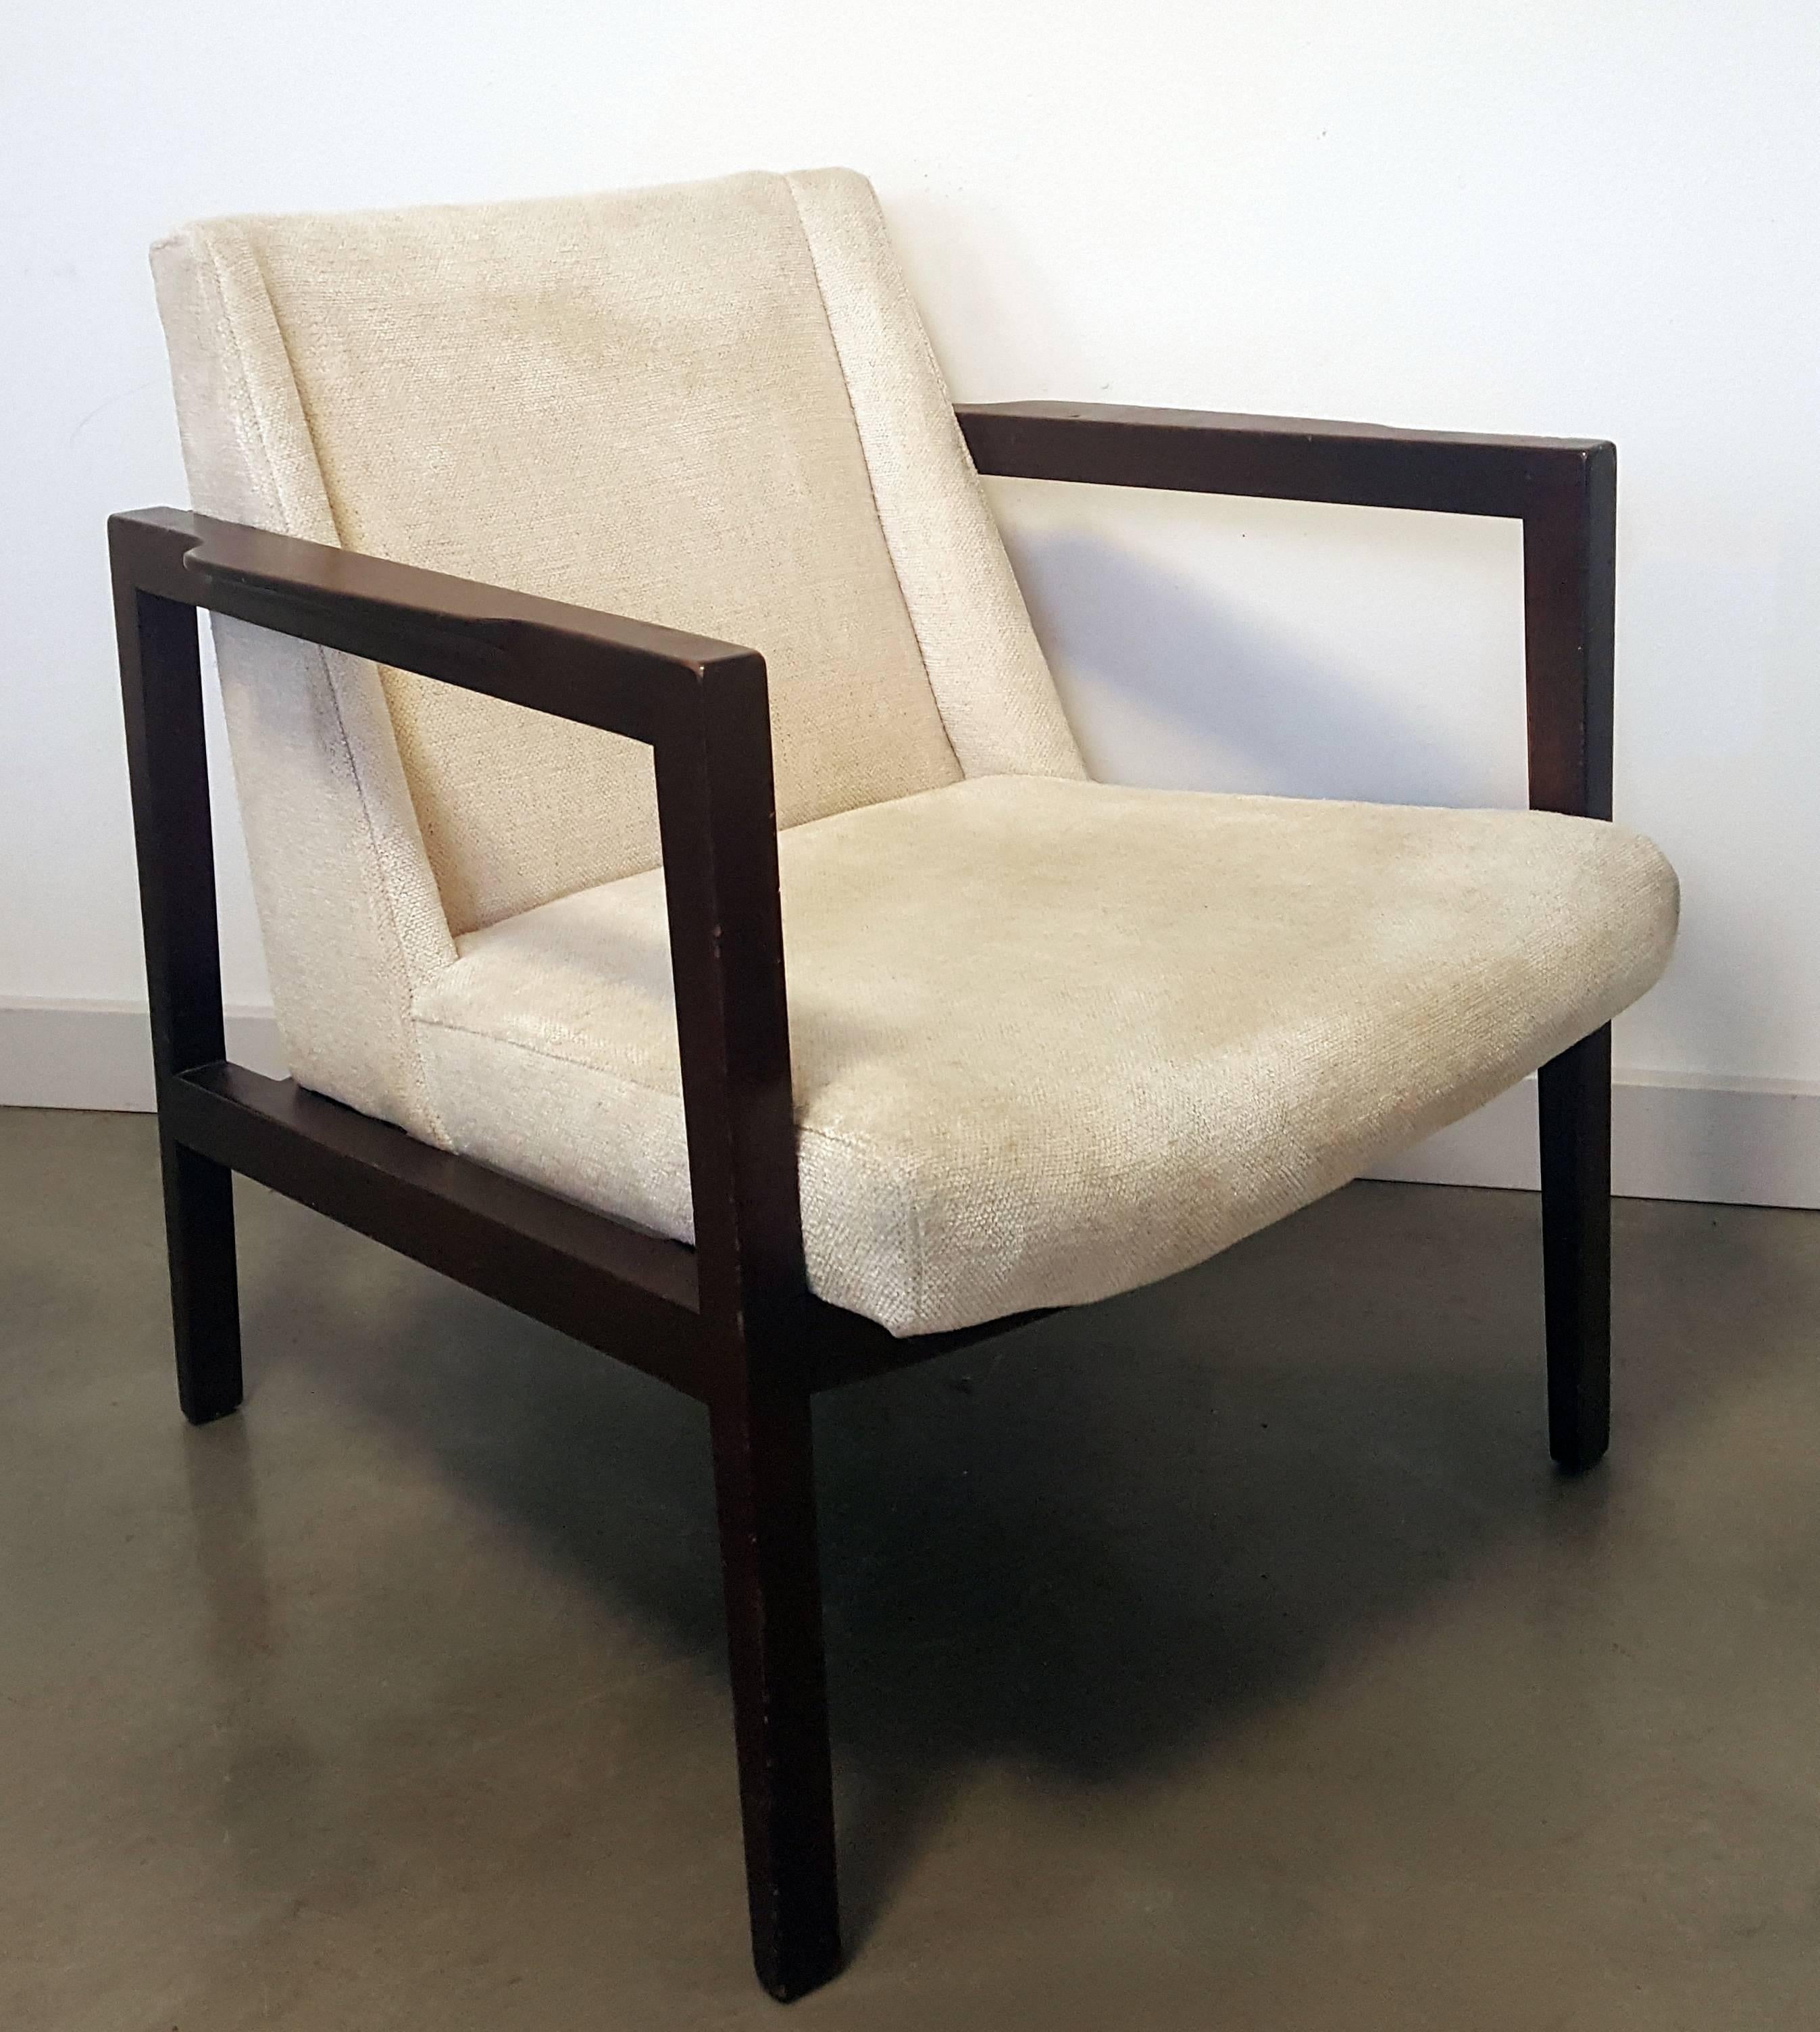 Open-frame lounge chair by Edward Wormley for Dunbar. Features espresso stained mahogany and original cream chenille fabric.